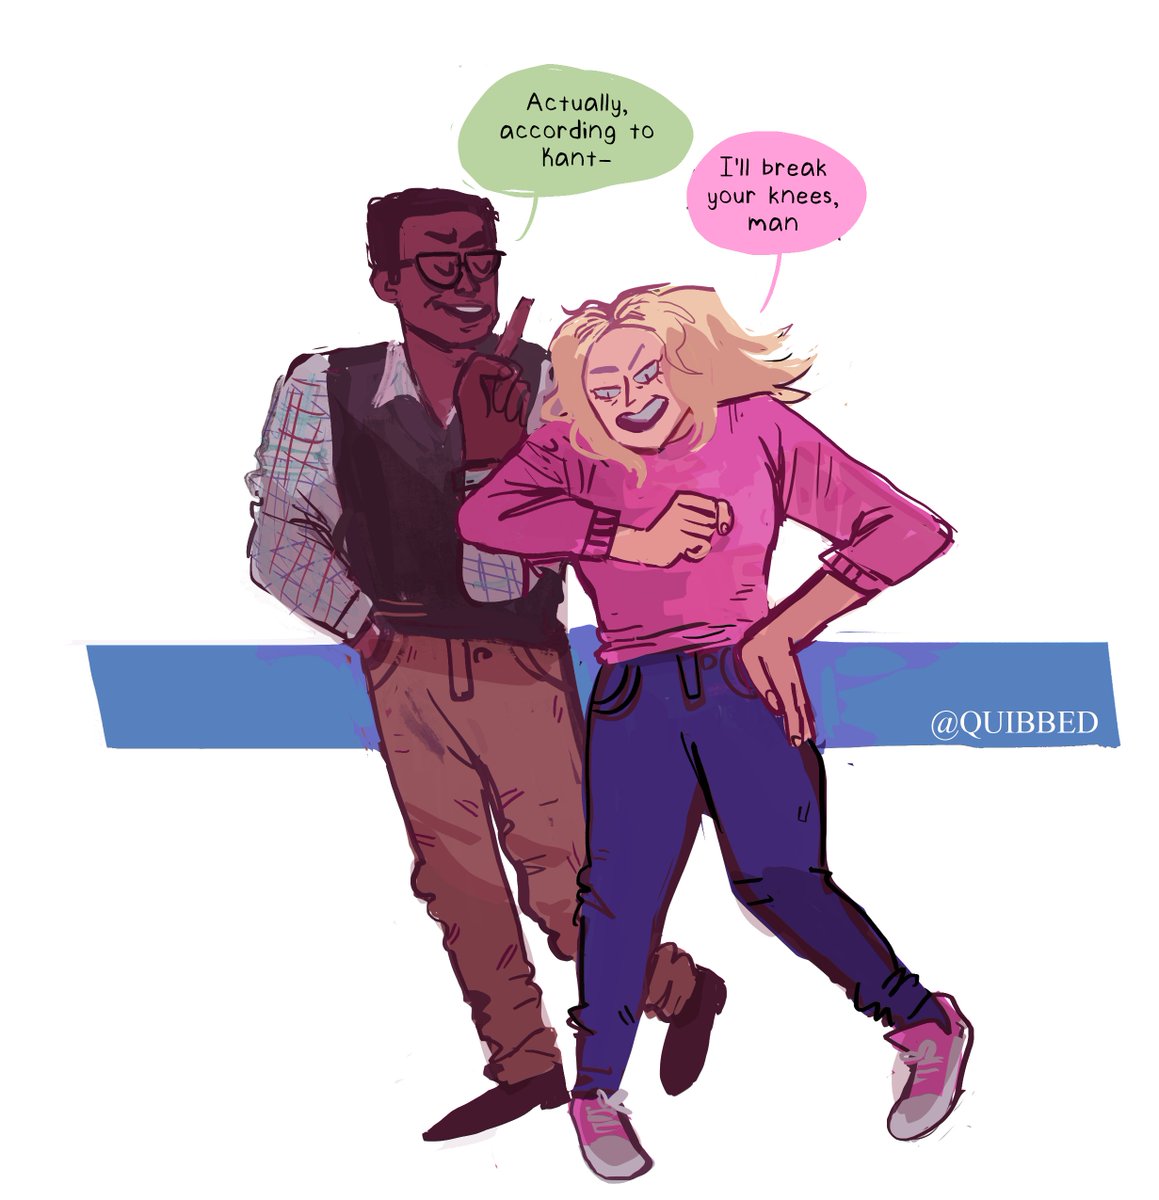 do chidi anagonye and eleanor shellstrop know that i love them 